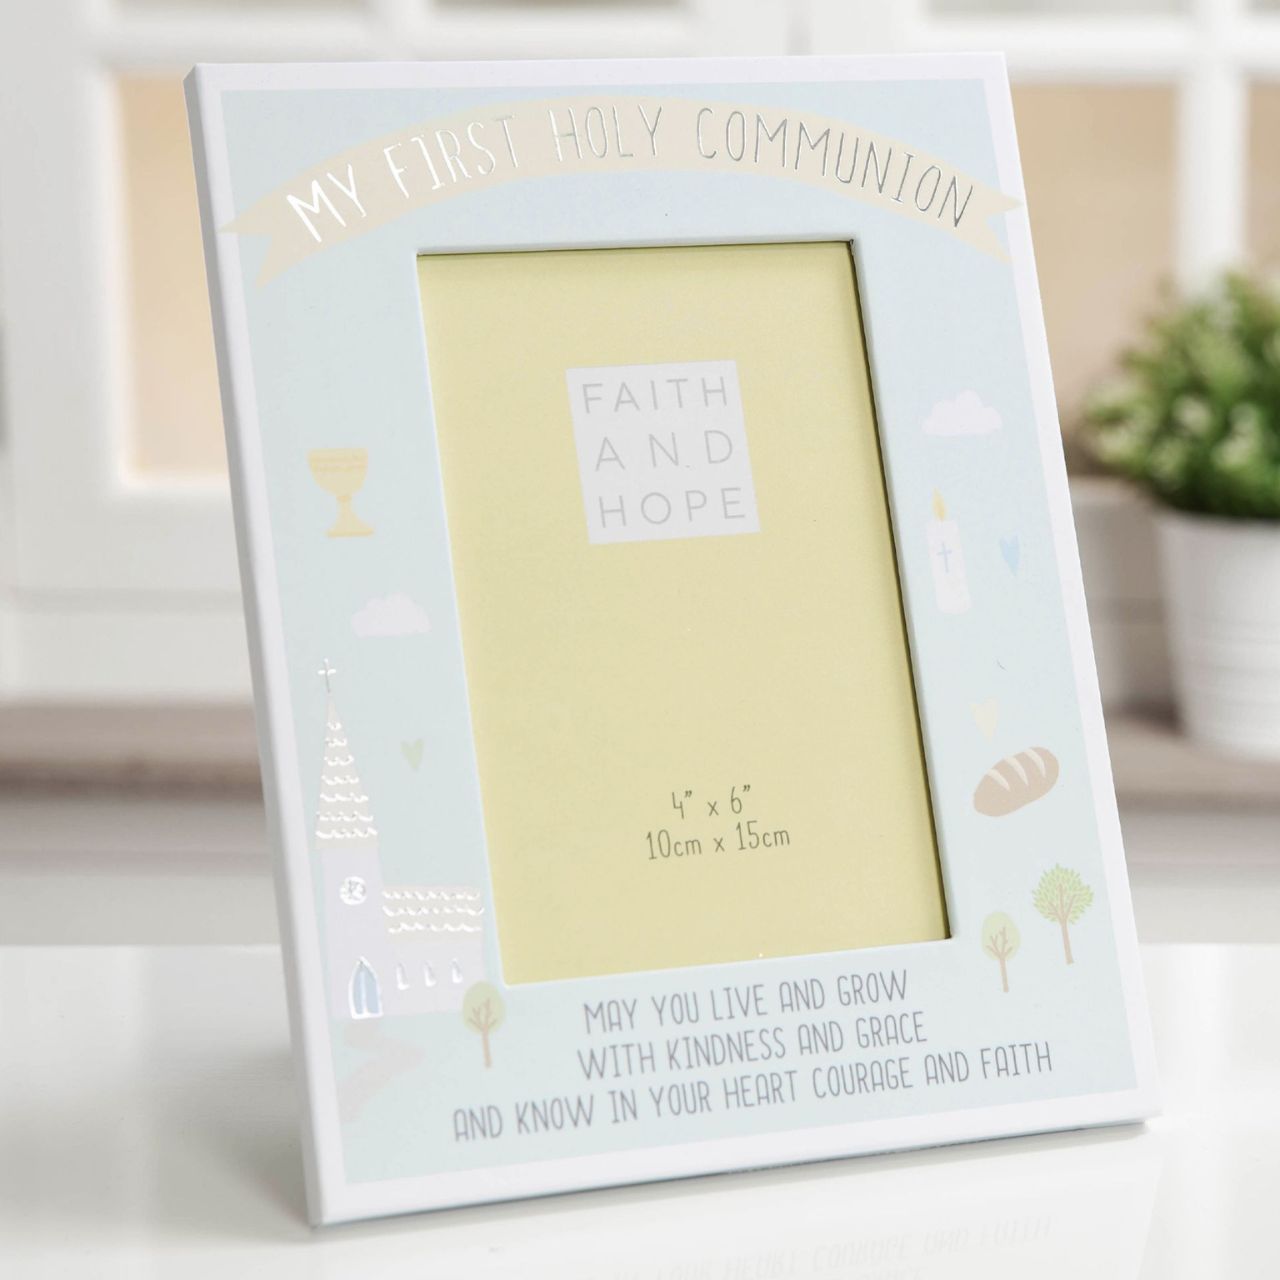 Preserve a precious memory from their FIRST HOLY COMMUNION with this adorable paper wrapped photo frame.